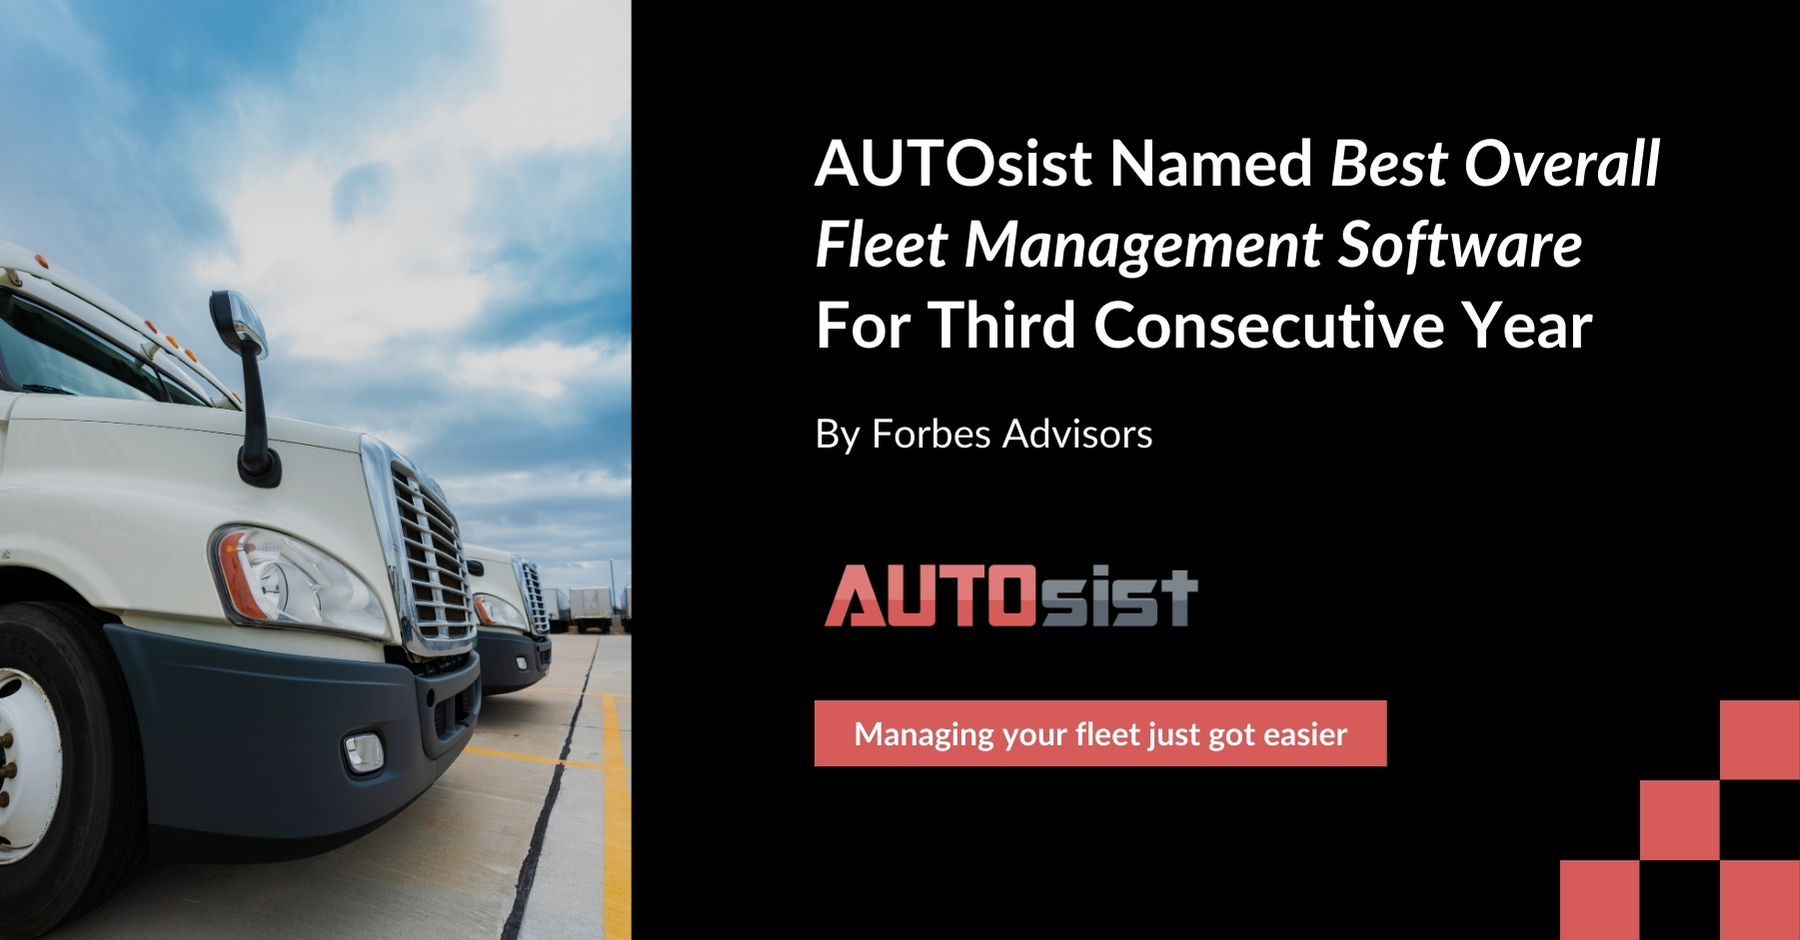 AUTOsist named Best Overall Fleet Management Software by Forbes for third straight year